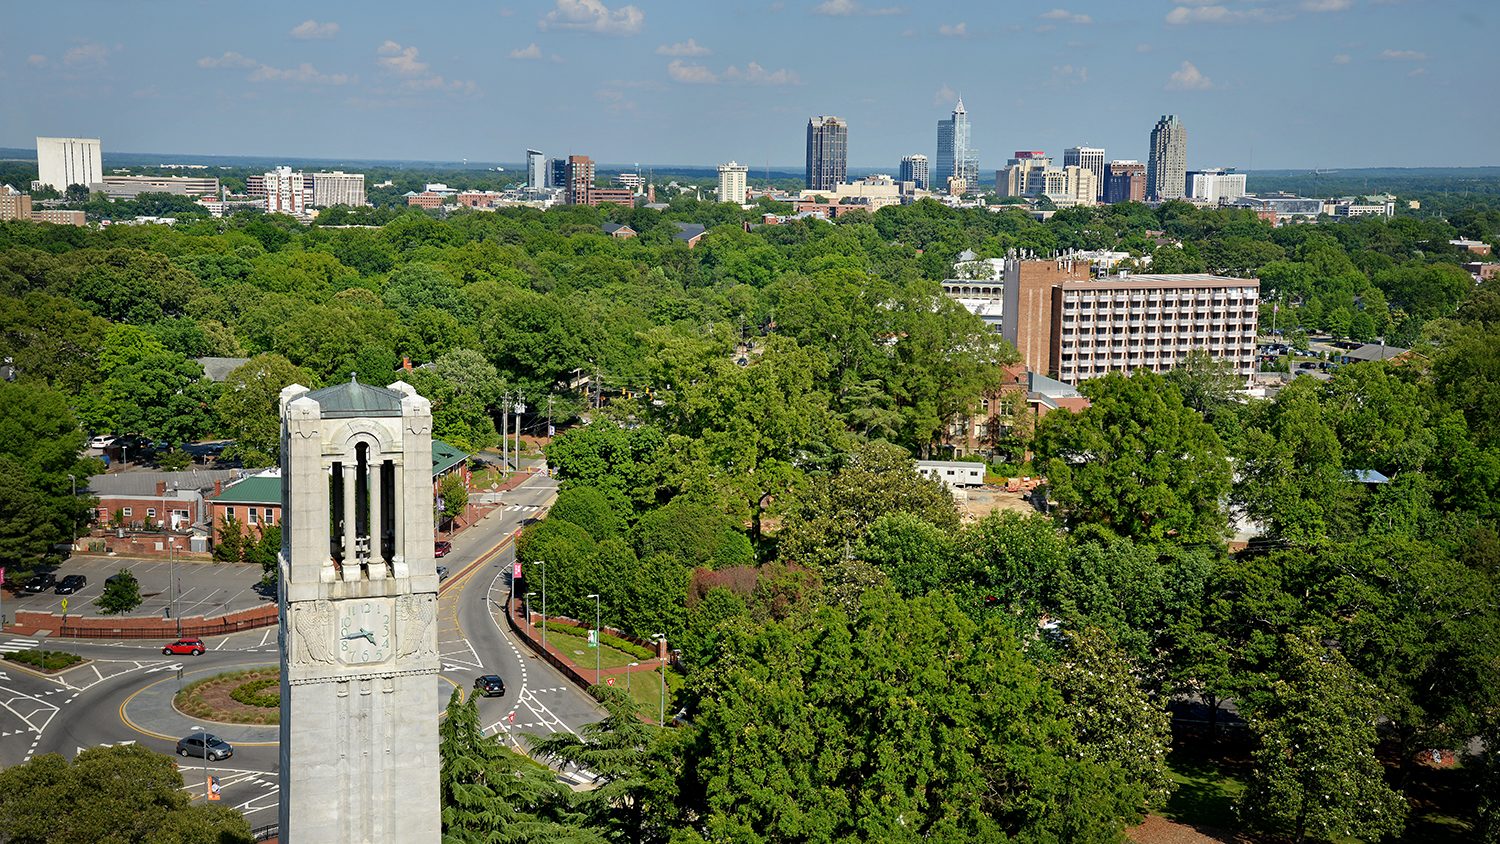 Drone shot of campus with Bell Tower in foreground